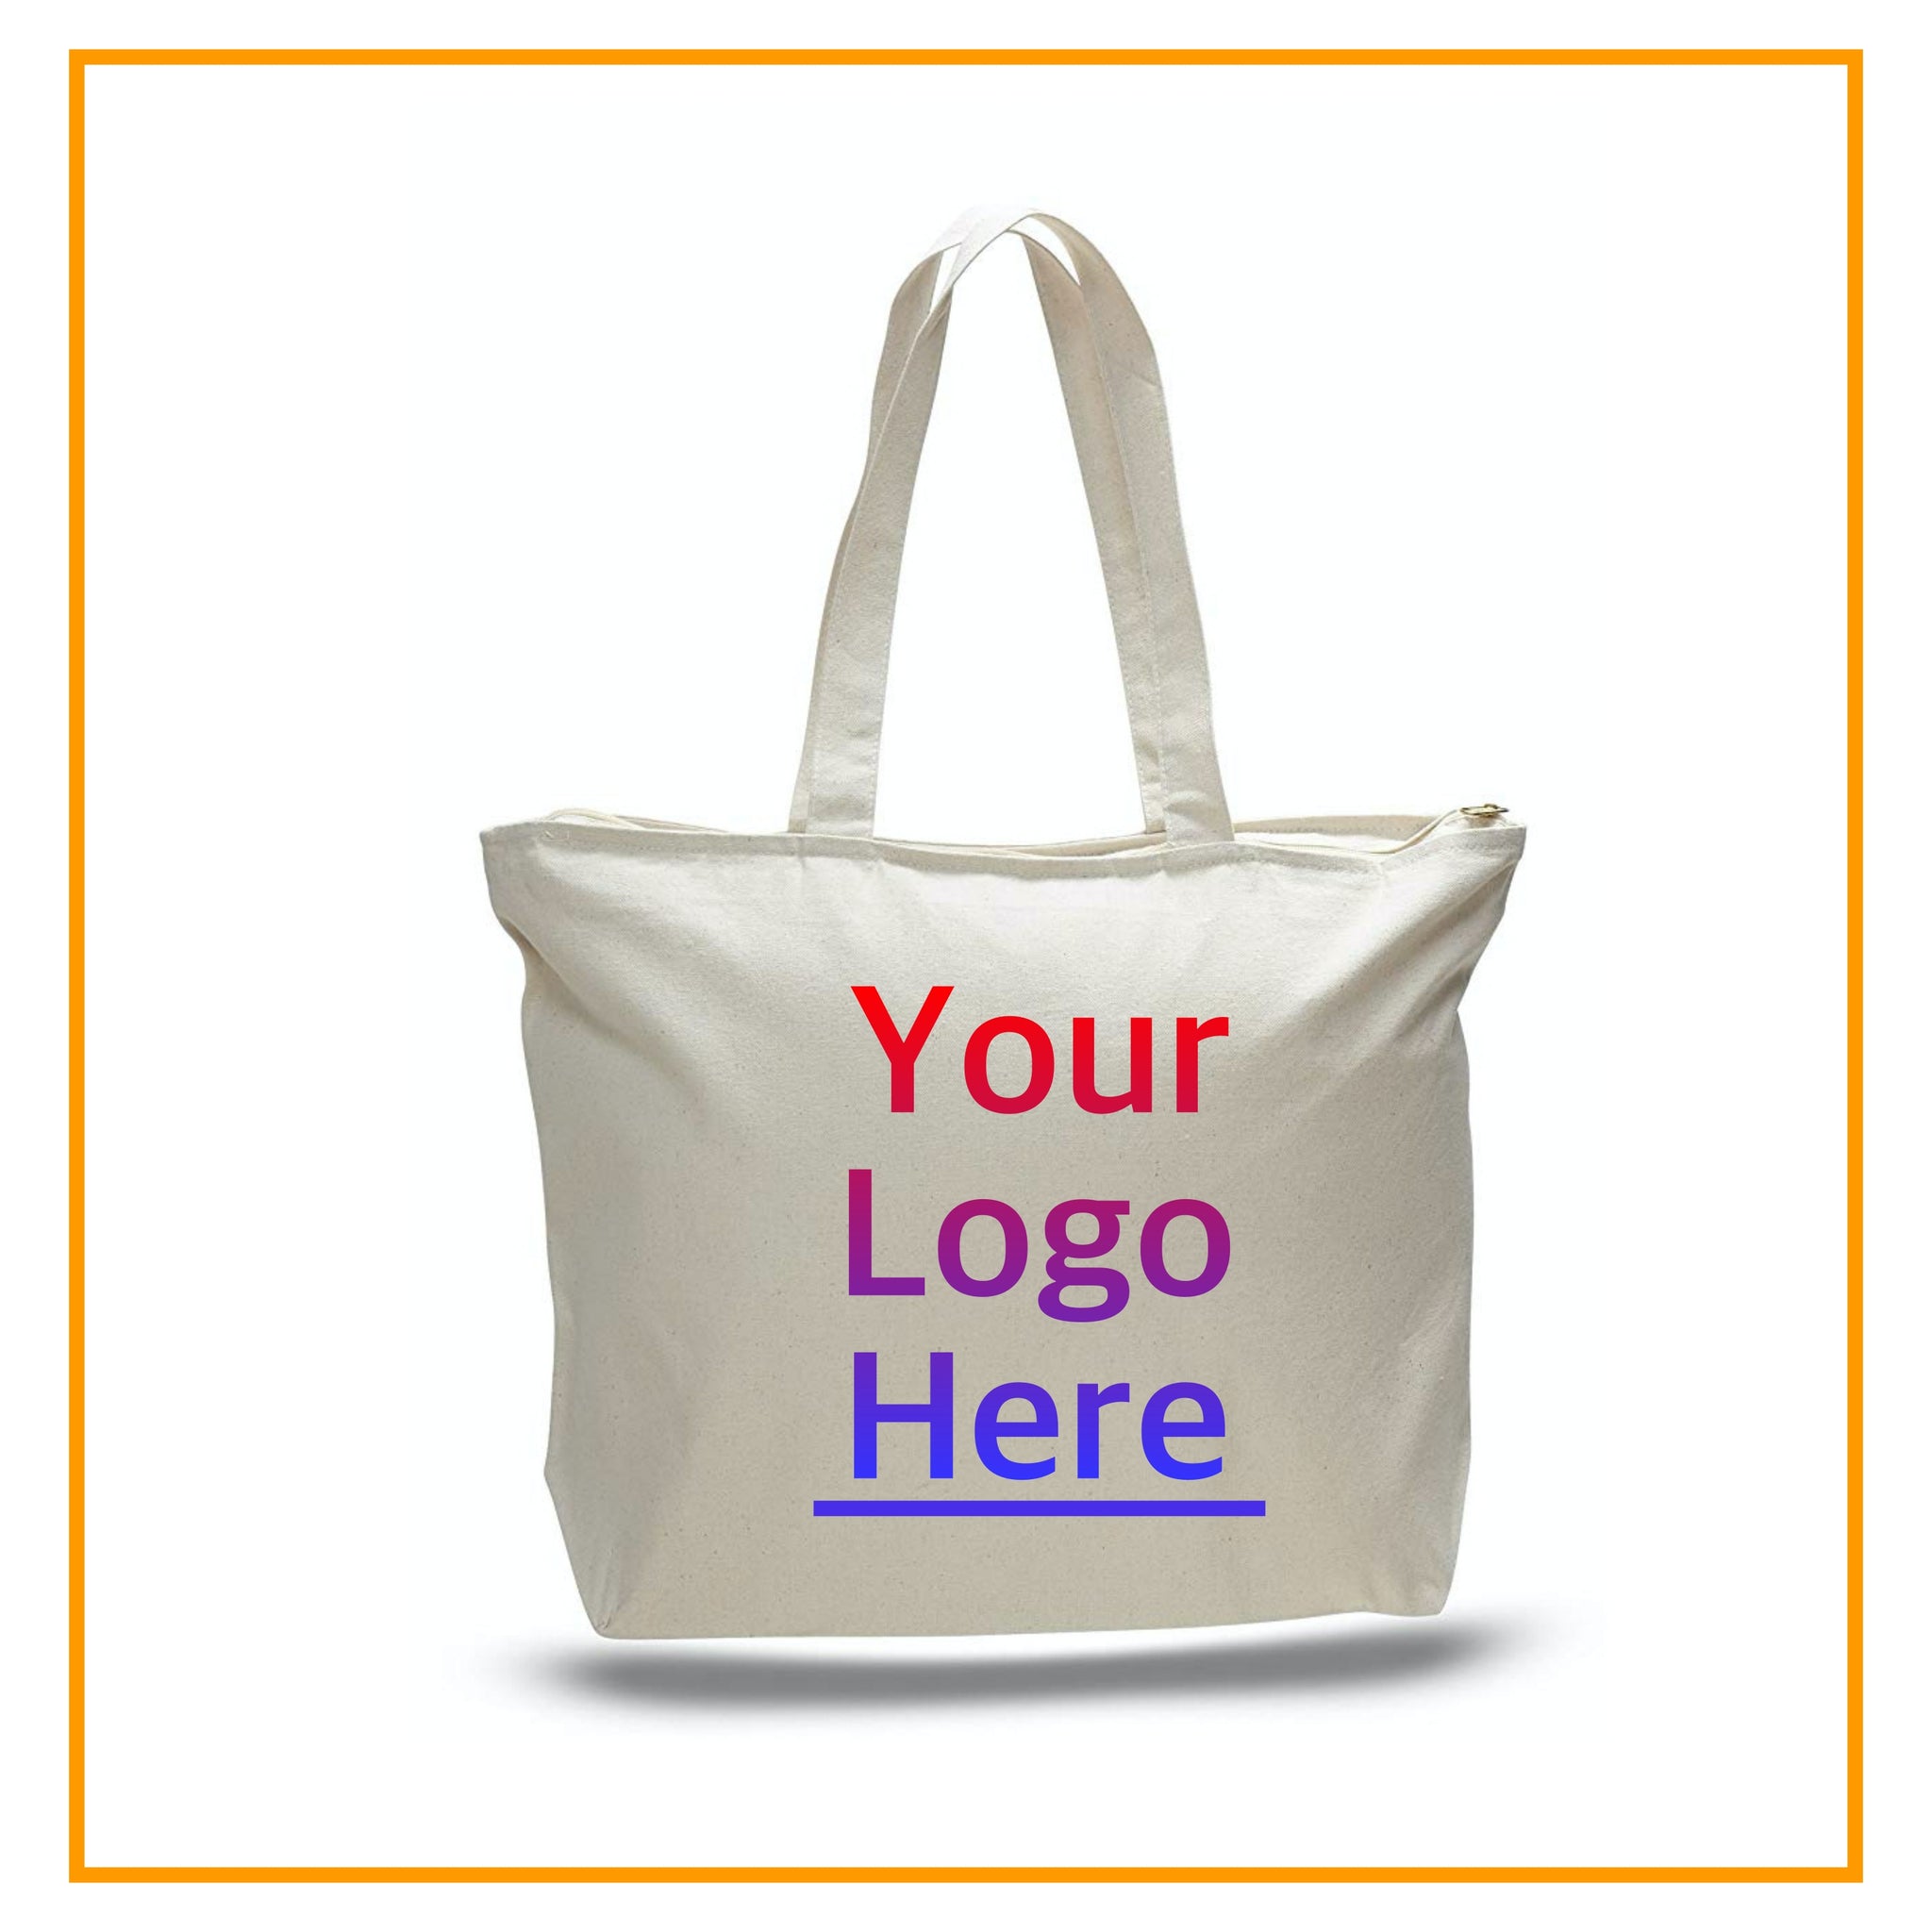 Custom Tote Bags, Personalized Promotional Tote Bags